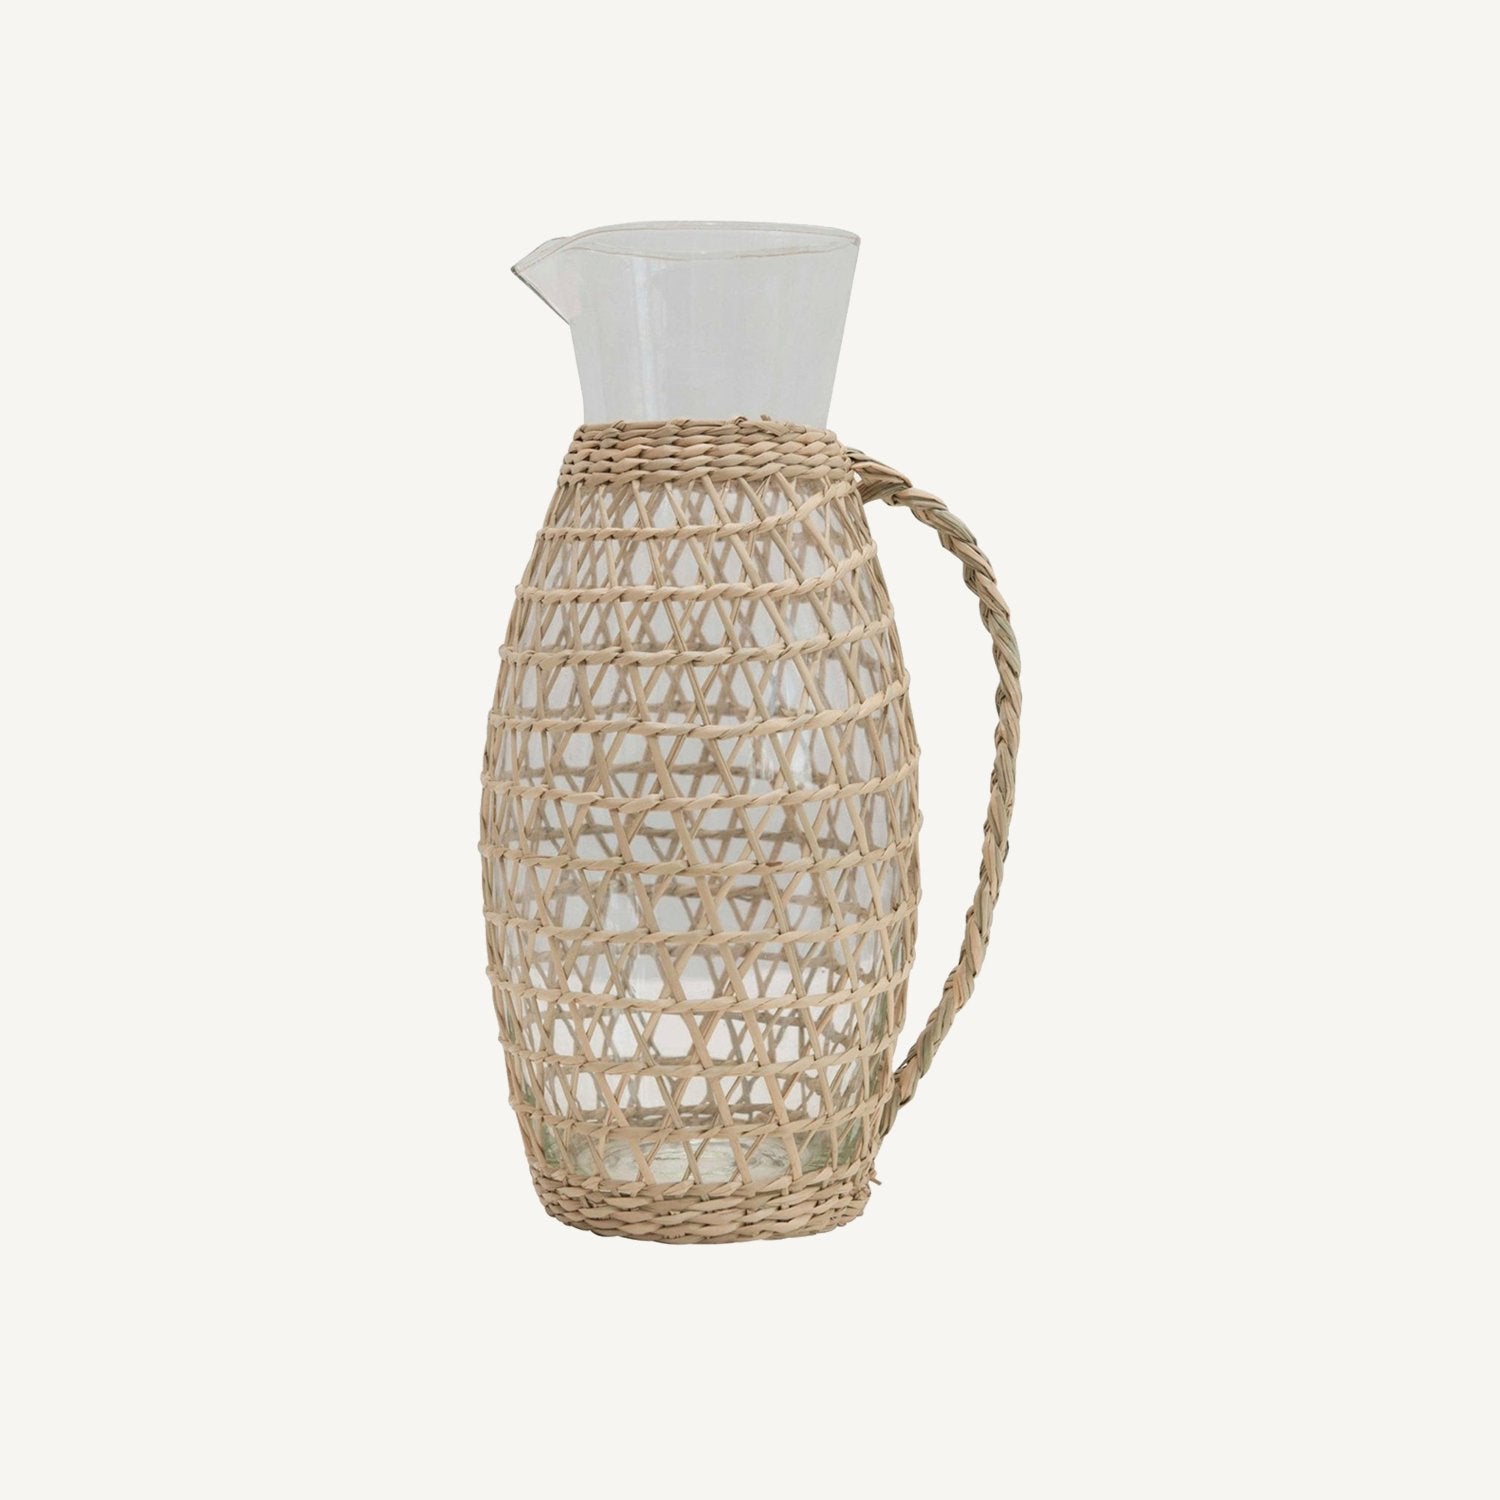 Glass Pitcher in Woven Seagrass Sleeve - Annie & Flora